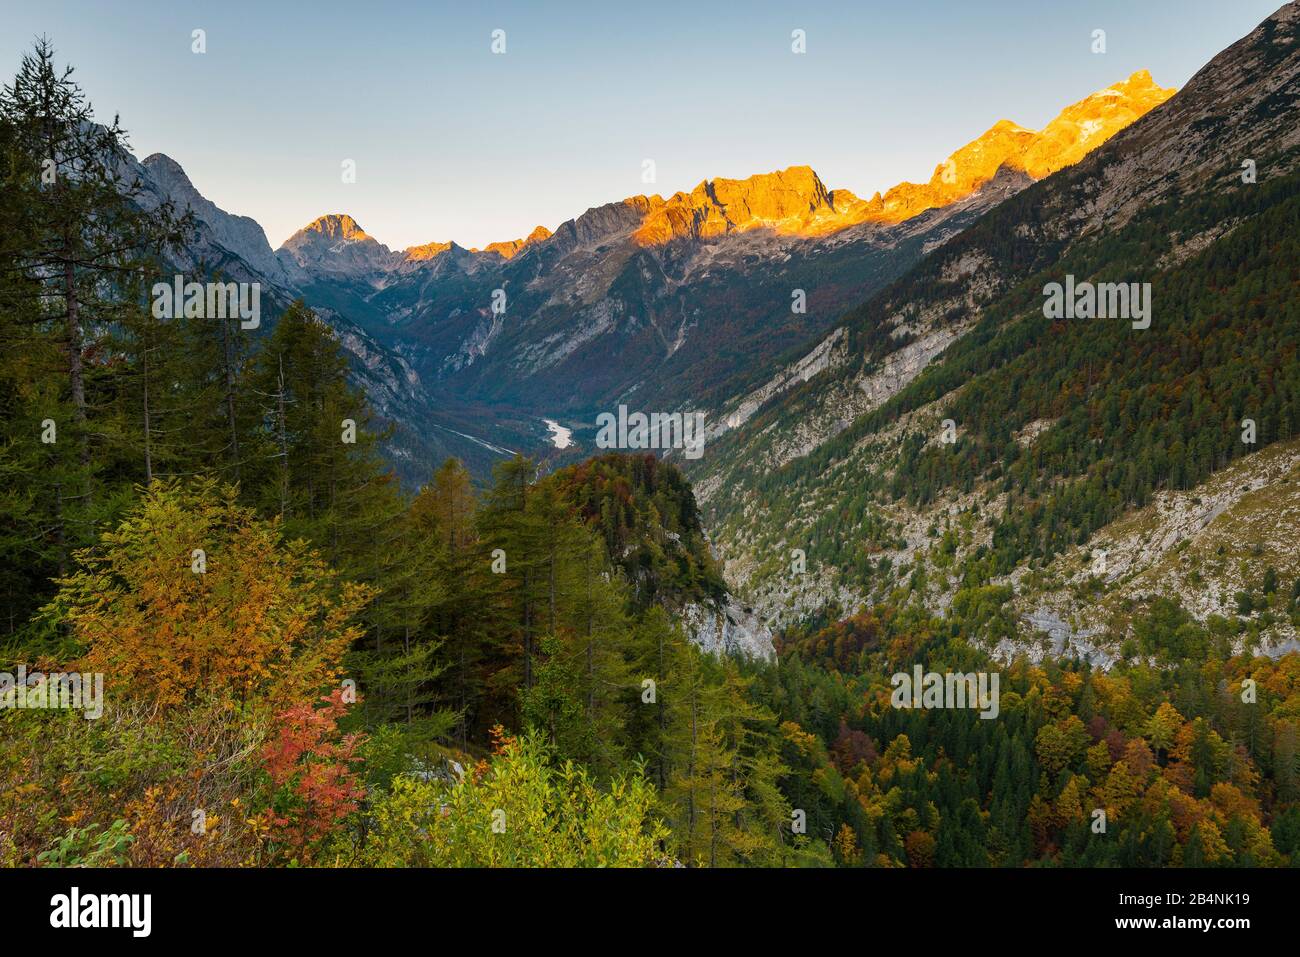 Soca valley in Slovenia, view from federal road 206 towards Trenta, sunrise Stock Photo